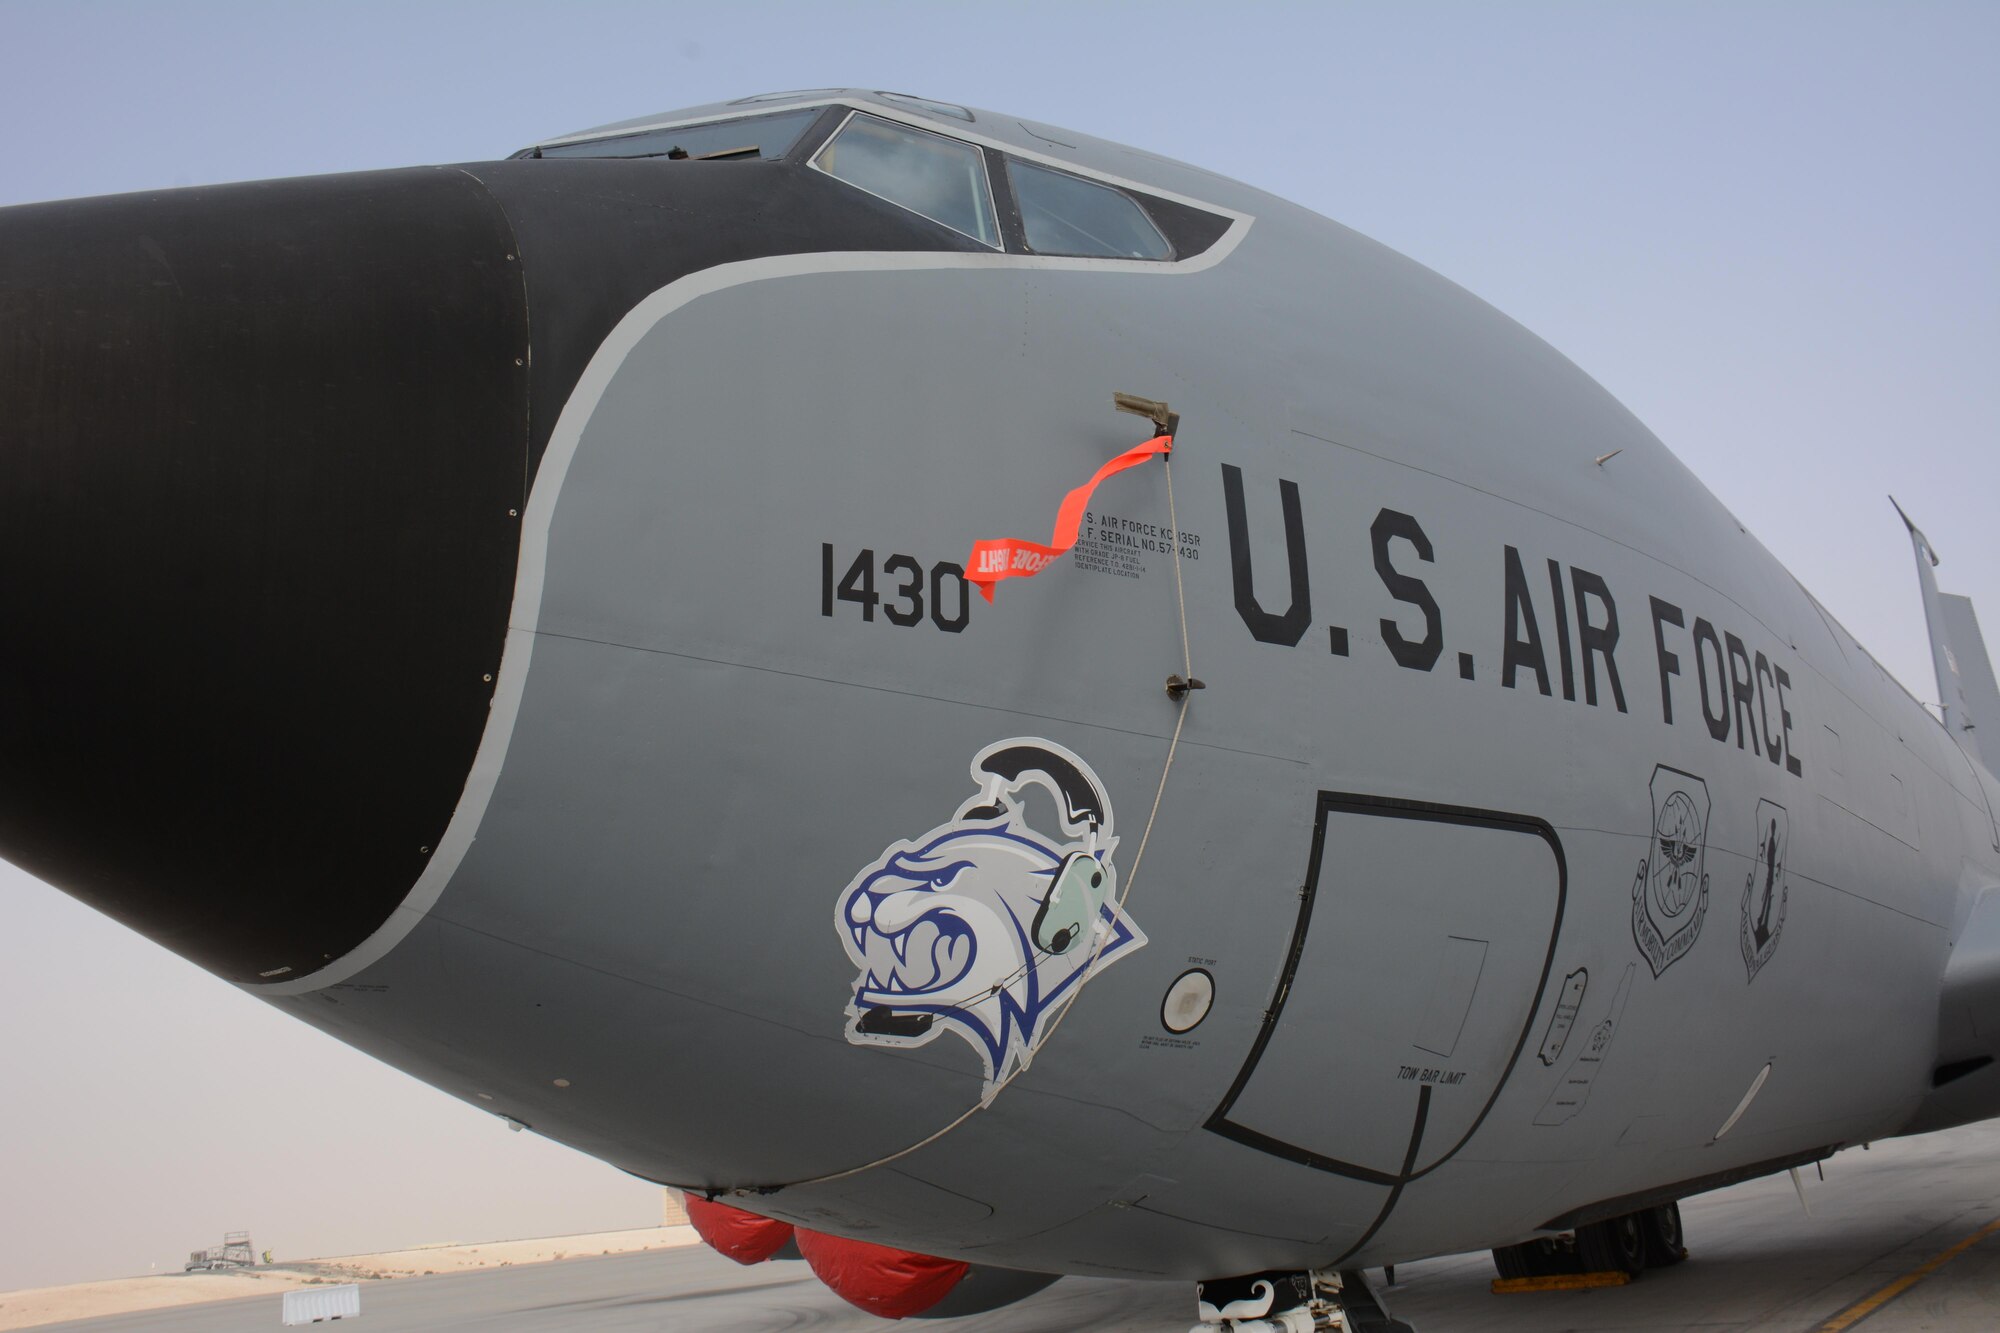 A KC-135 Stratotanker deployed from the 157th Air Refueling Wing in New Hampshire, waits for visitors at the annual Flight Line Fest Jan. 10 at Al Udeid Air Base, Qatar. The KC-135 fleet at AUAB, the largest in the world, flew more than 100,000 combat hours in 2015. The KC-135 was one of five U.S. Air Force aircraft on display during the event. Flight Line Fest is a joint partnership between the 379th Air Expeditionary Wing and Qatar Emiri Air Force held to foster relations between Qatar and the United States. (U.S. Air Force photo by Tech. Sgt. James Hodgman/Released)